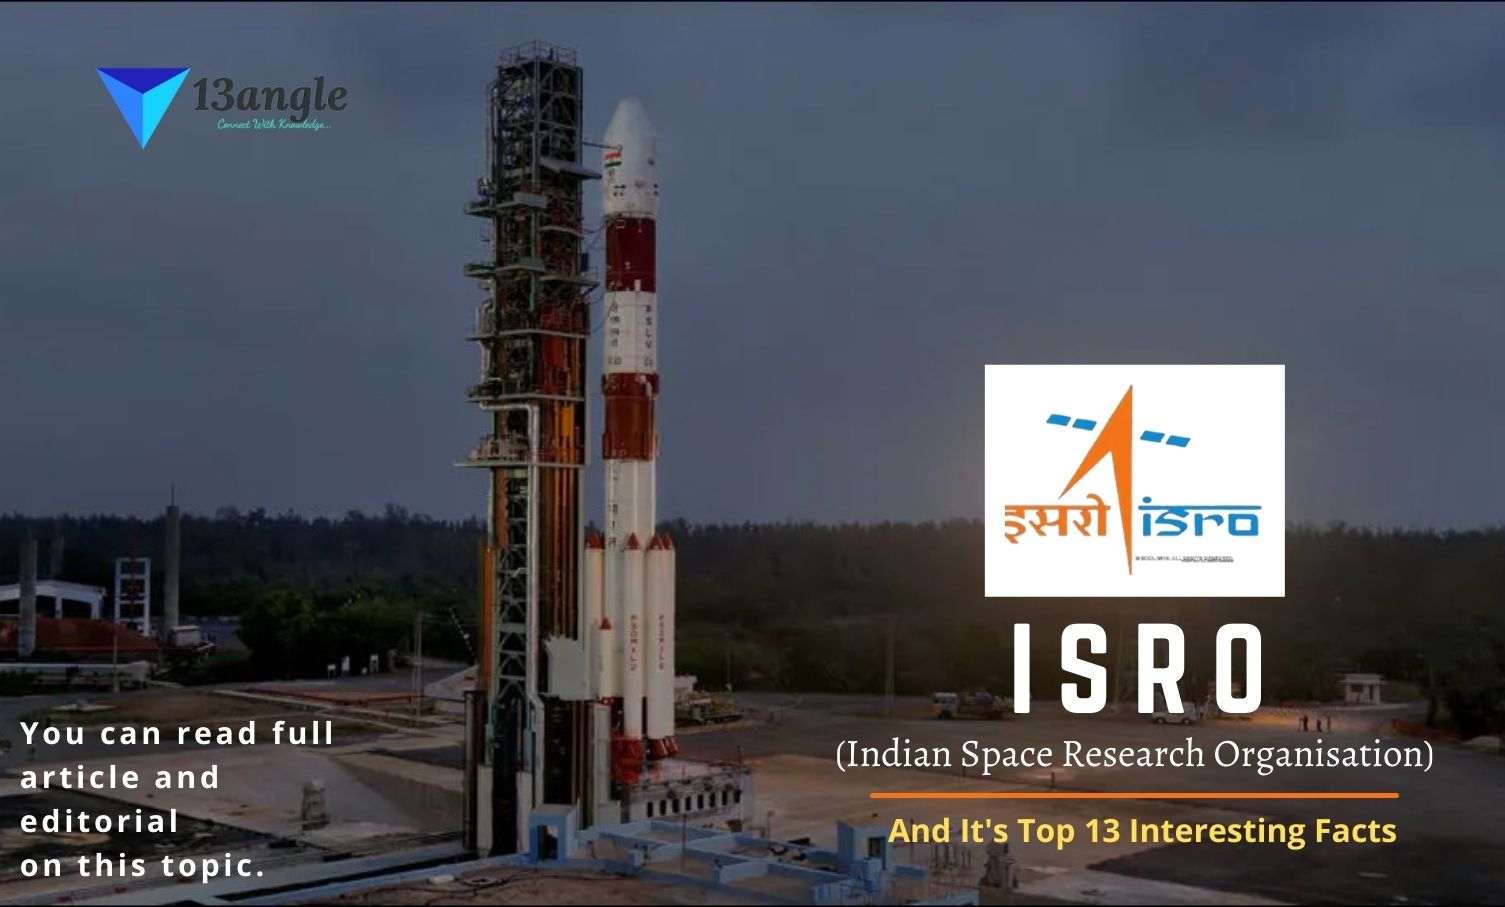 ISRO And It's Top 13 Interesting Facts- 13angle.com